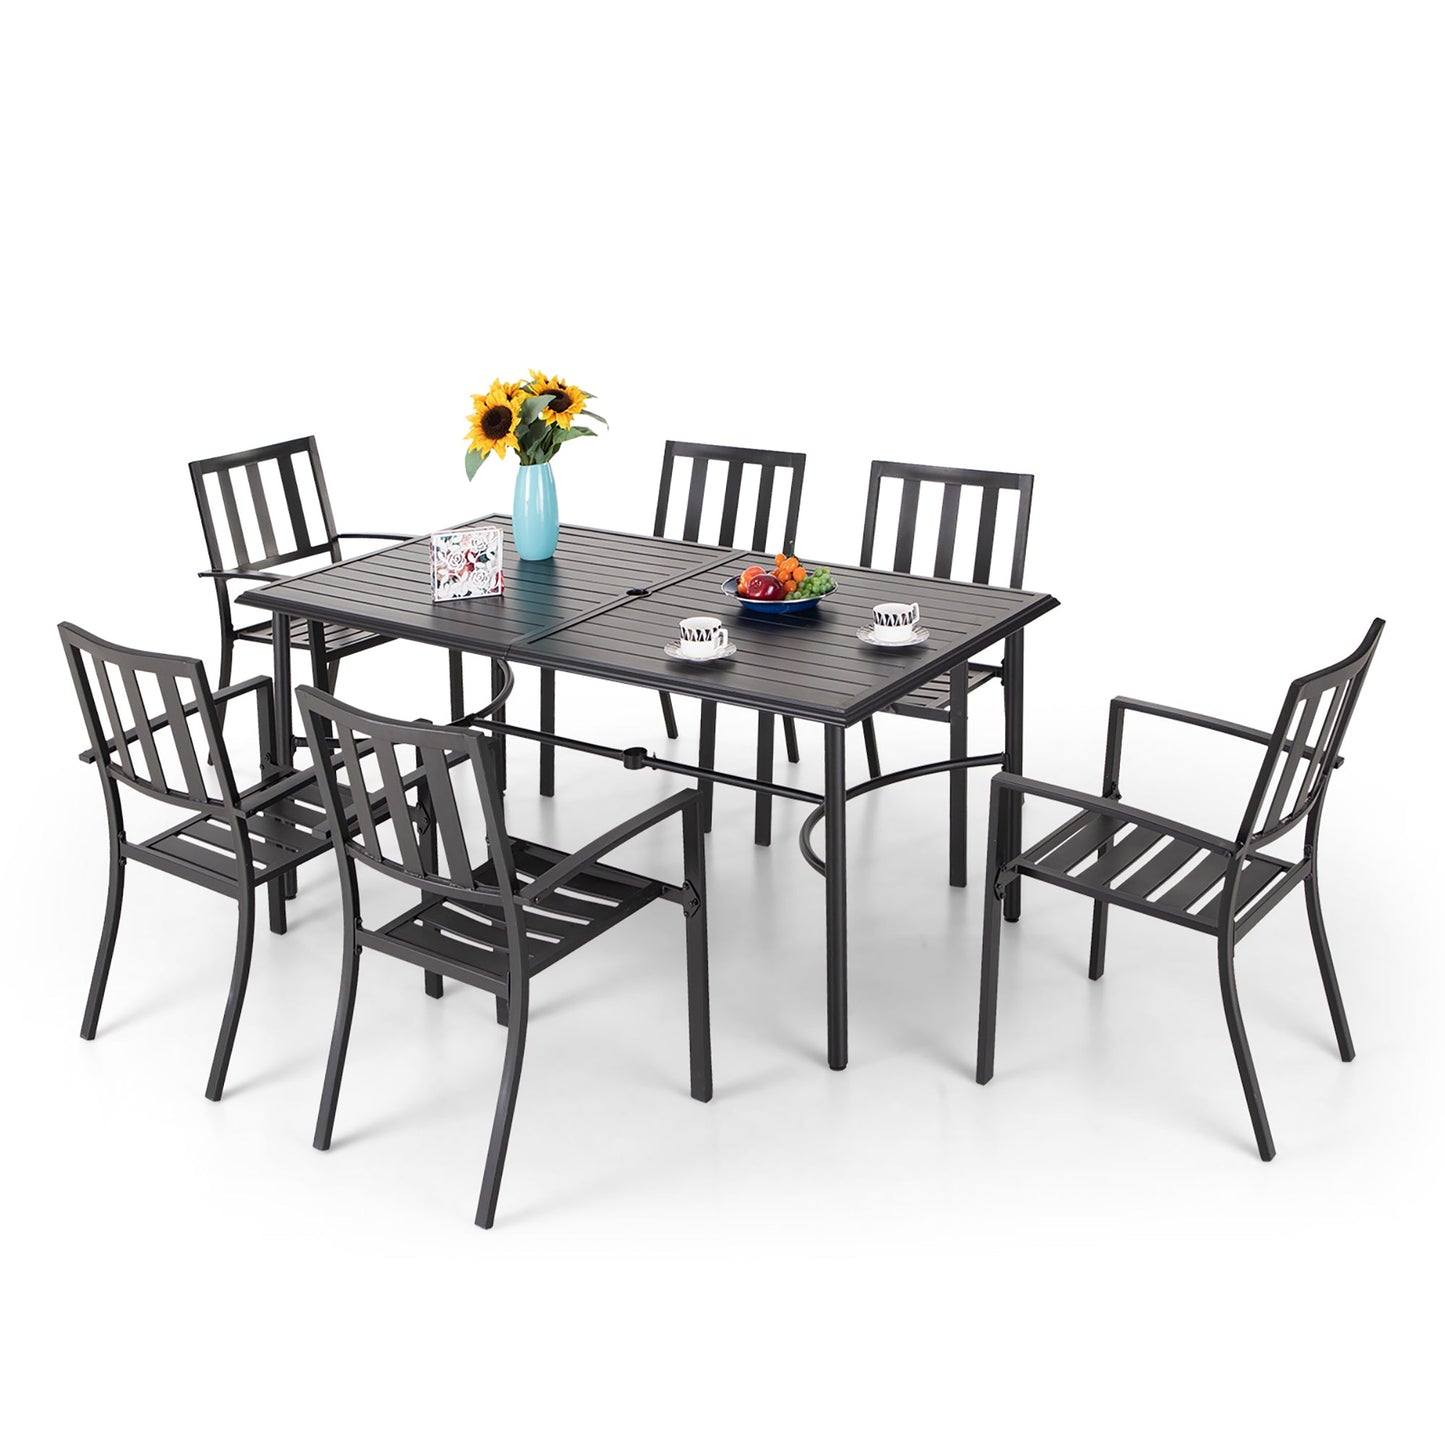 Sophia & William 7 Piece Outdoor Patio Dining Set Modern Metal Furniture with Stackable Chairs